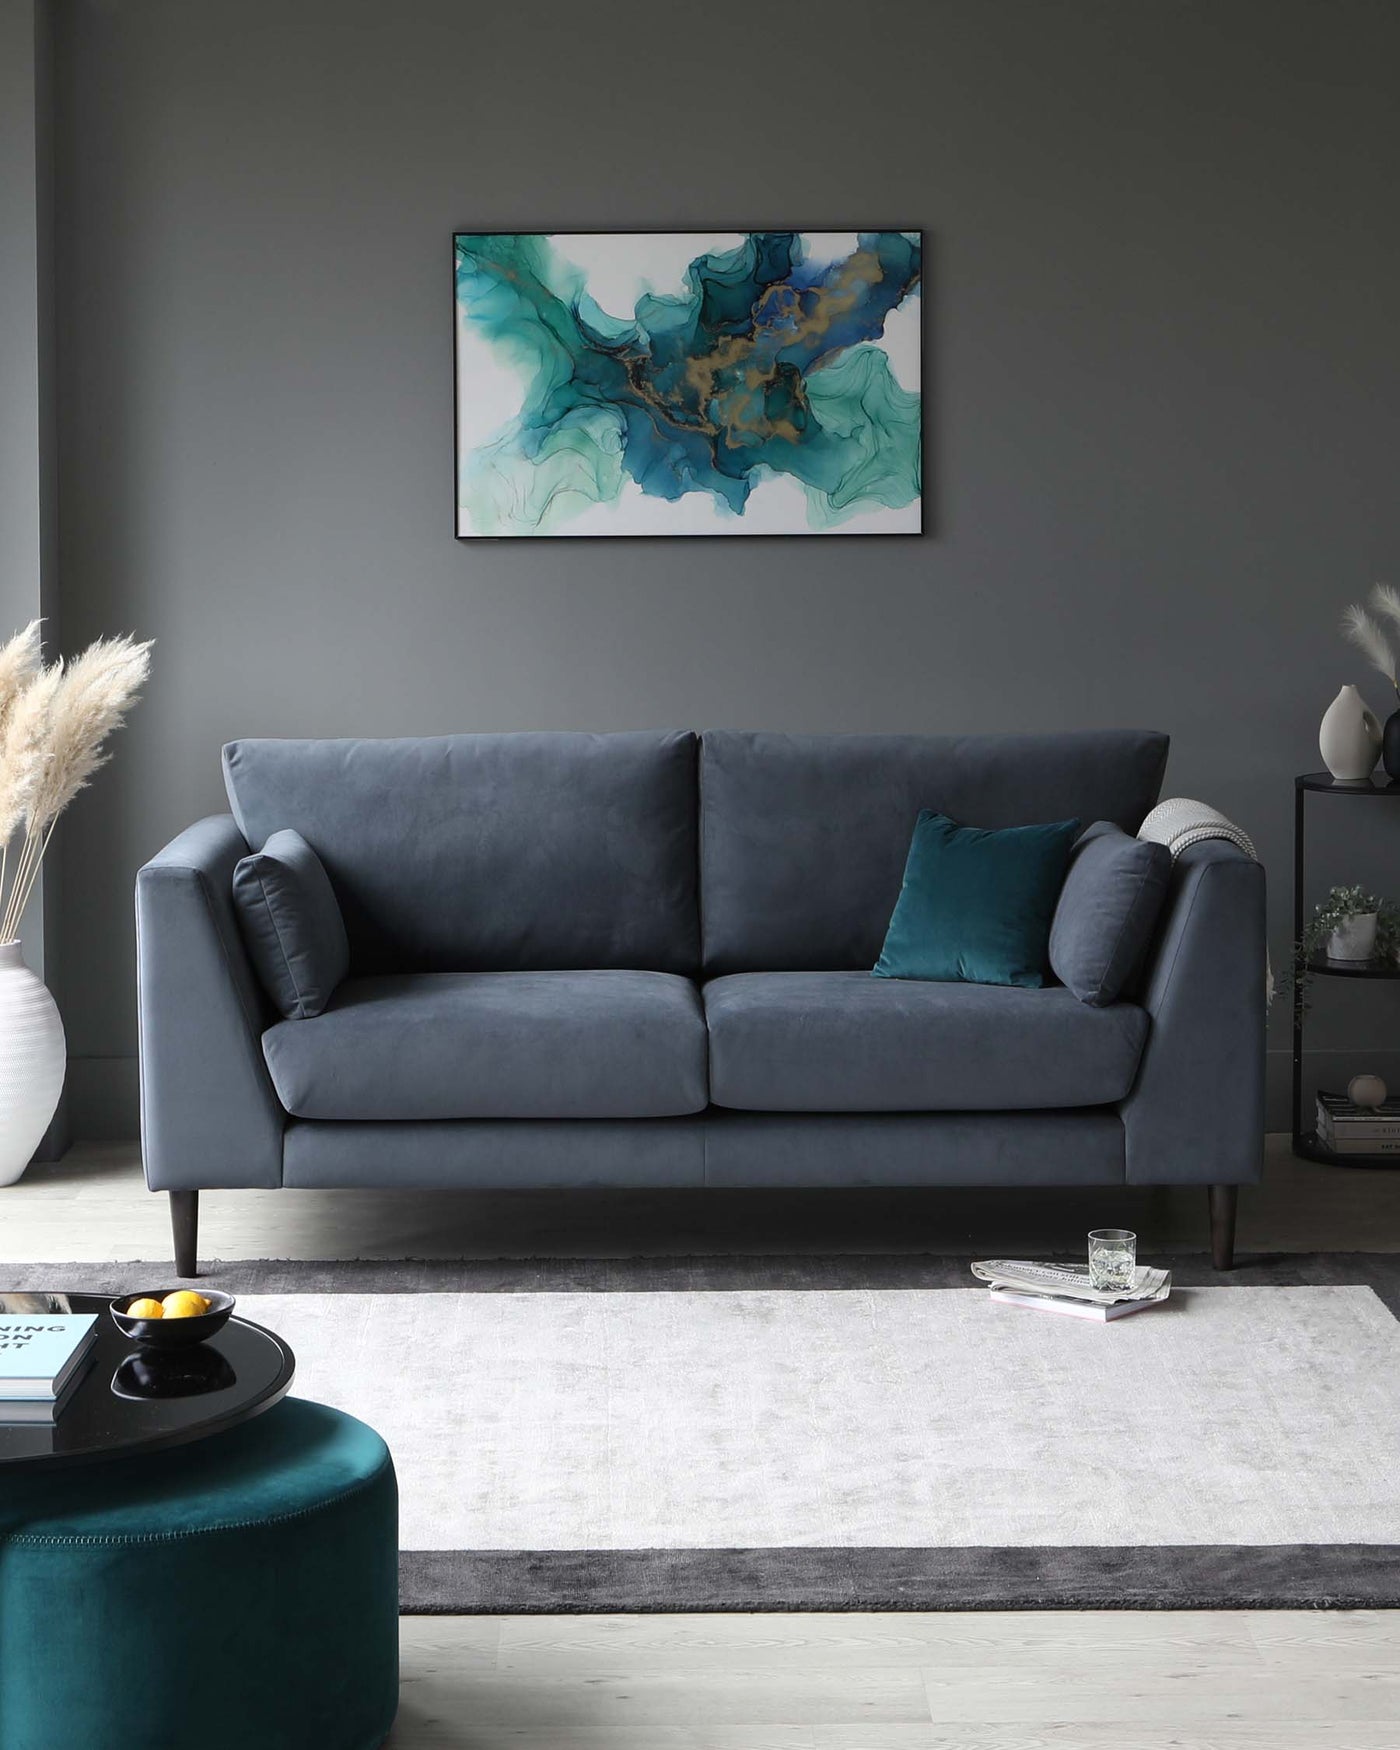 A modern living room with a three-seater plush velvet sofa in a shade of dark grey, featuring deep cushioned seats and structured armrests. In the foreground is a round, teal-coloured velvet ottoman and a rectangular rug with a faded pattern in white and grey tones. A sleek dark round coffee table with a reflective surface sits atop the rug. The room is decorated in a contemporary style with a muted colour palette.